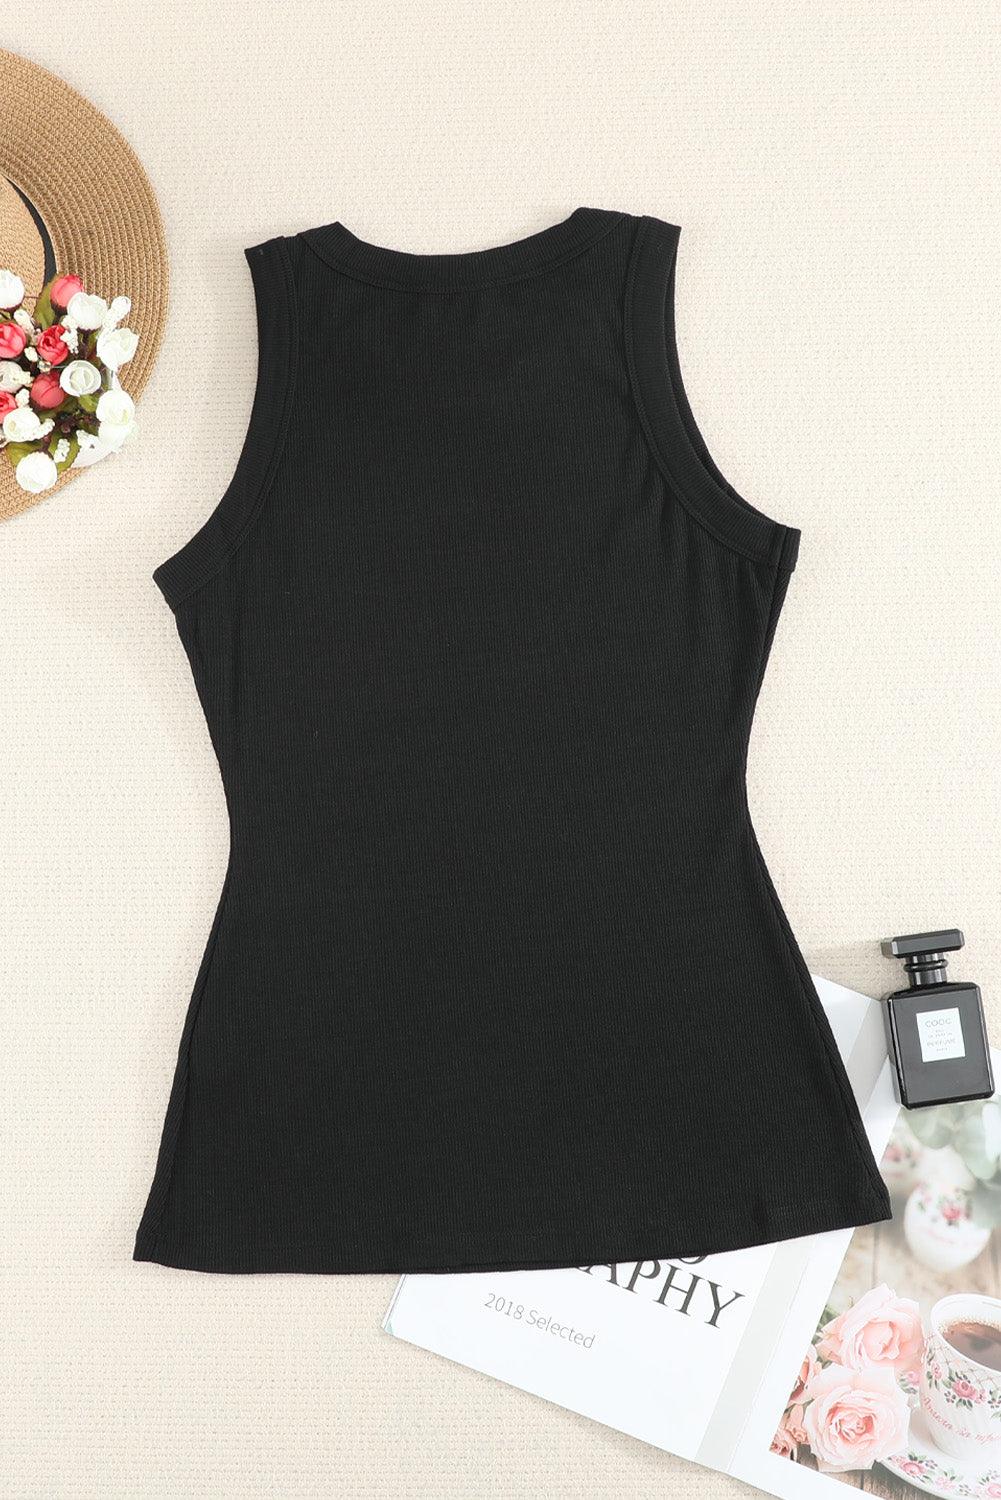 Solid Black Round Neck Ribbed Tank Top - L & M Kee, LLC